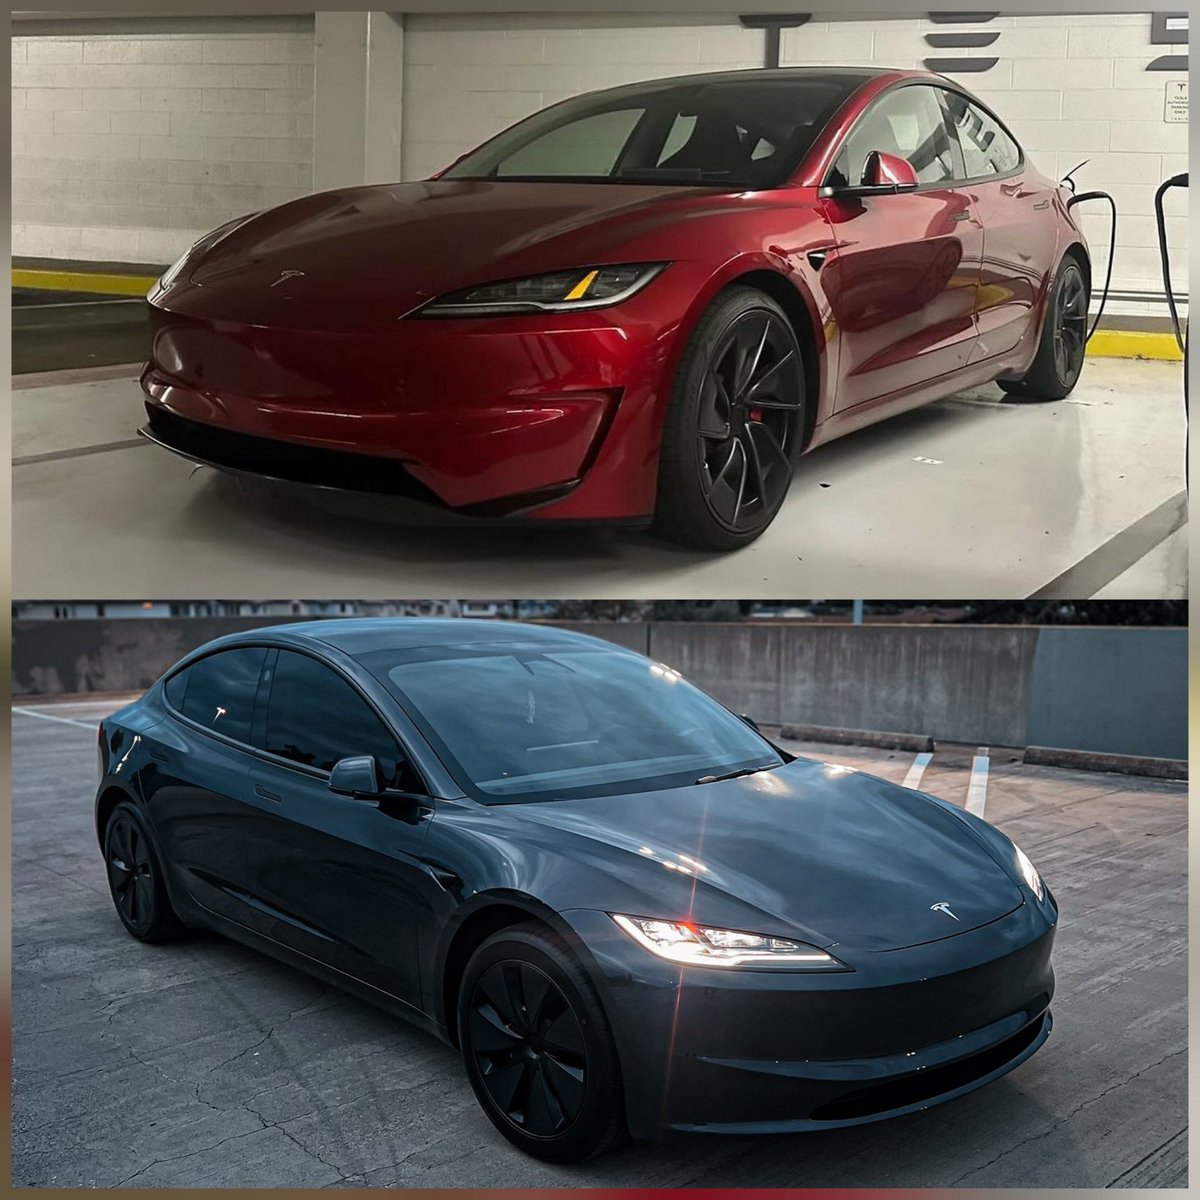 THE NEW TESLA RED OR BLACK!?